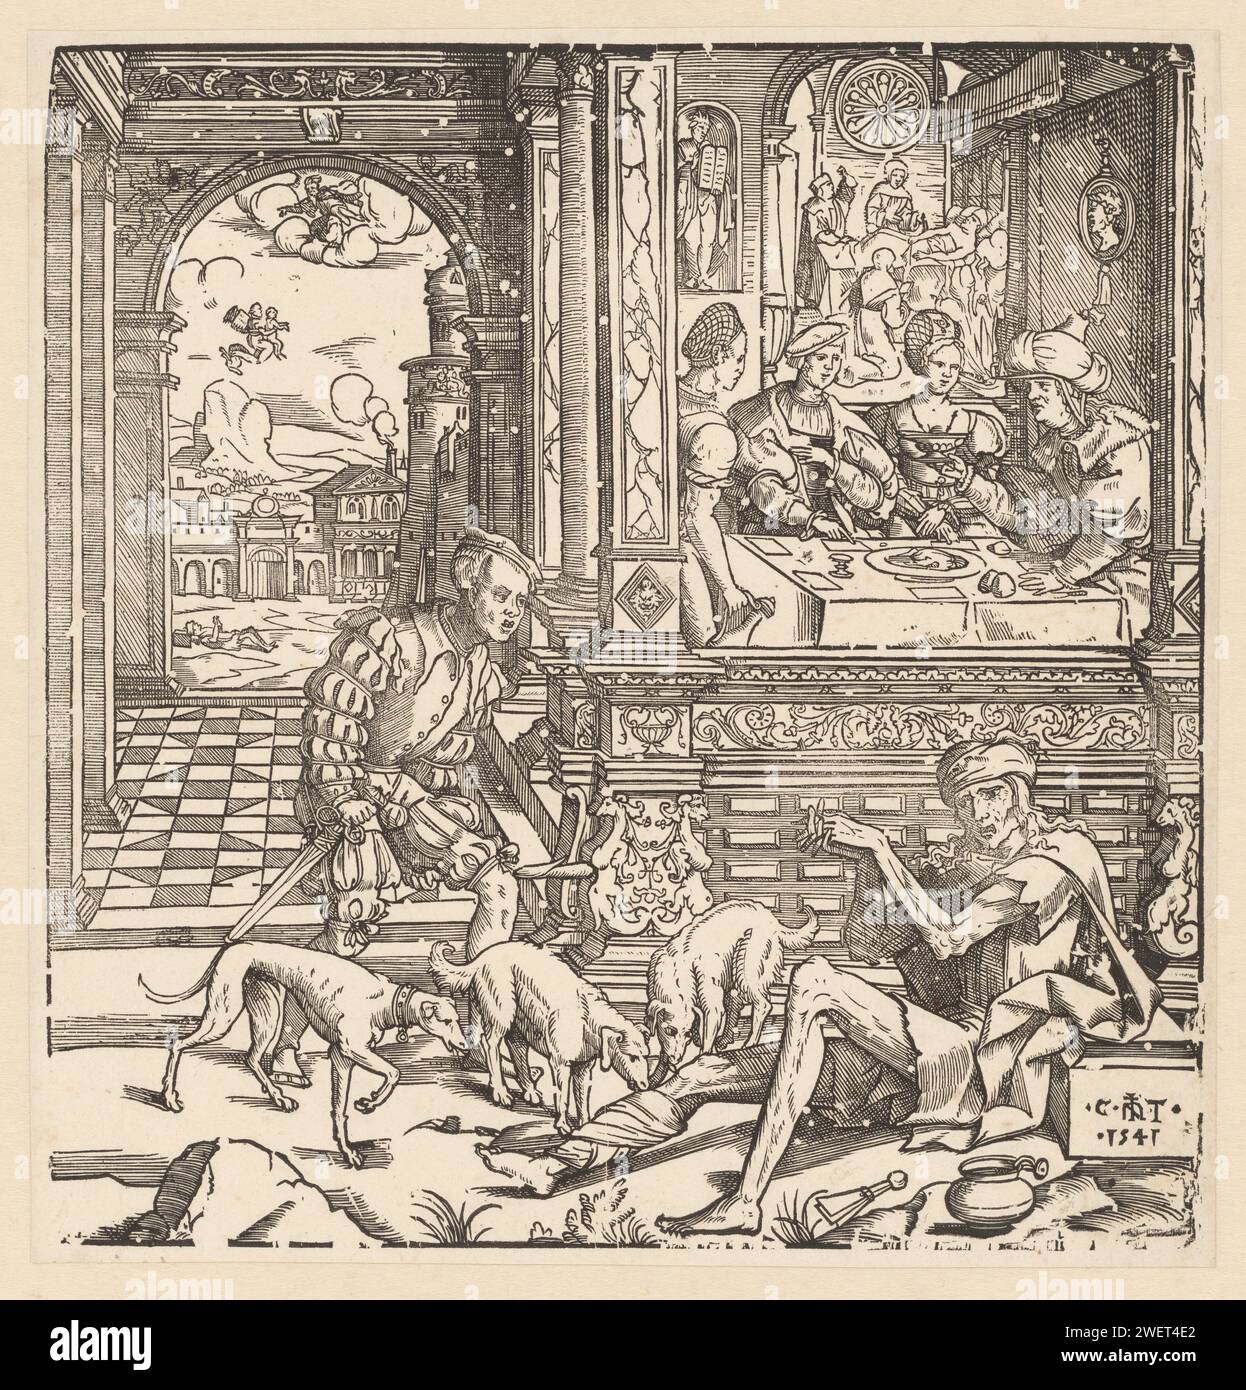 The rich man and the poor Lazarus, Cornelis Anthonisz., 1541 print The rich man with three dogs and Lazarus in rags, at the house in which a party is going on. Left in the background soul of Lazarus worn to heaven, on the right in the background deathbed of rich man and soul who goes to hell.  paper  the rich man (Dives) is feasting, while poor Lazarus is starving at the gate (dogs licking Lazarus' sores) (Luke 16:19-31). Lazarus dies: his soul is carried into Abraham's lap by angels. Dives dies; his soul is brought into hell by devils Stock Photo